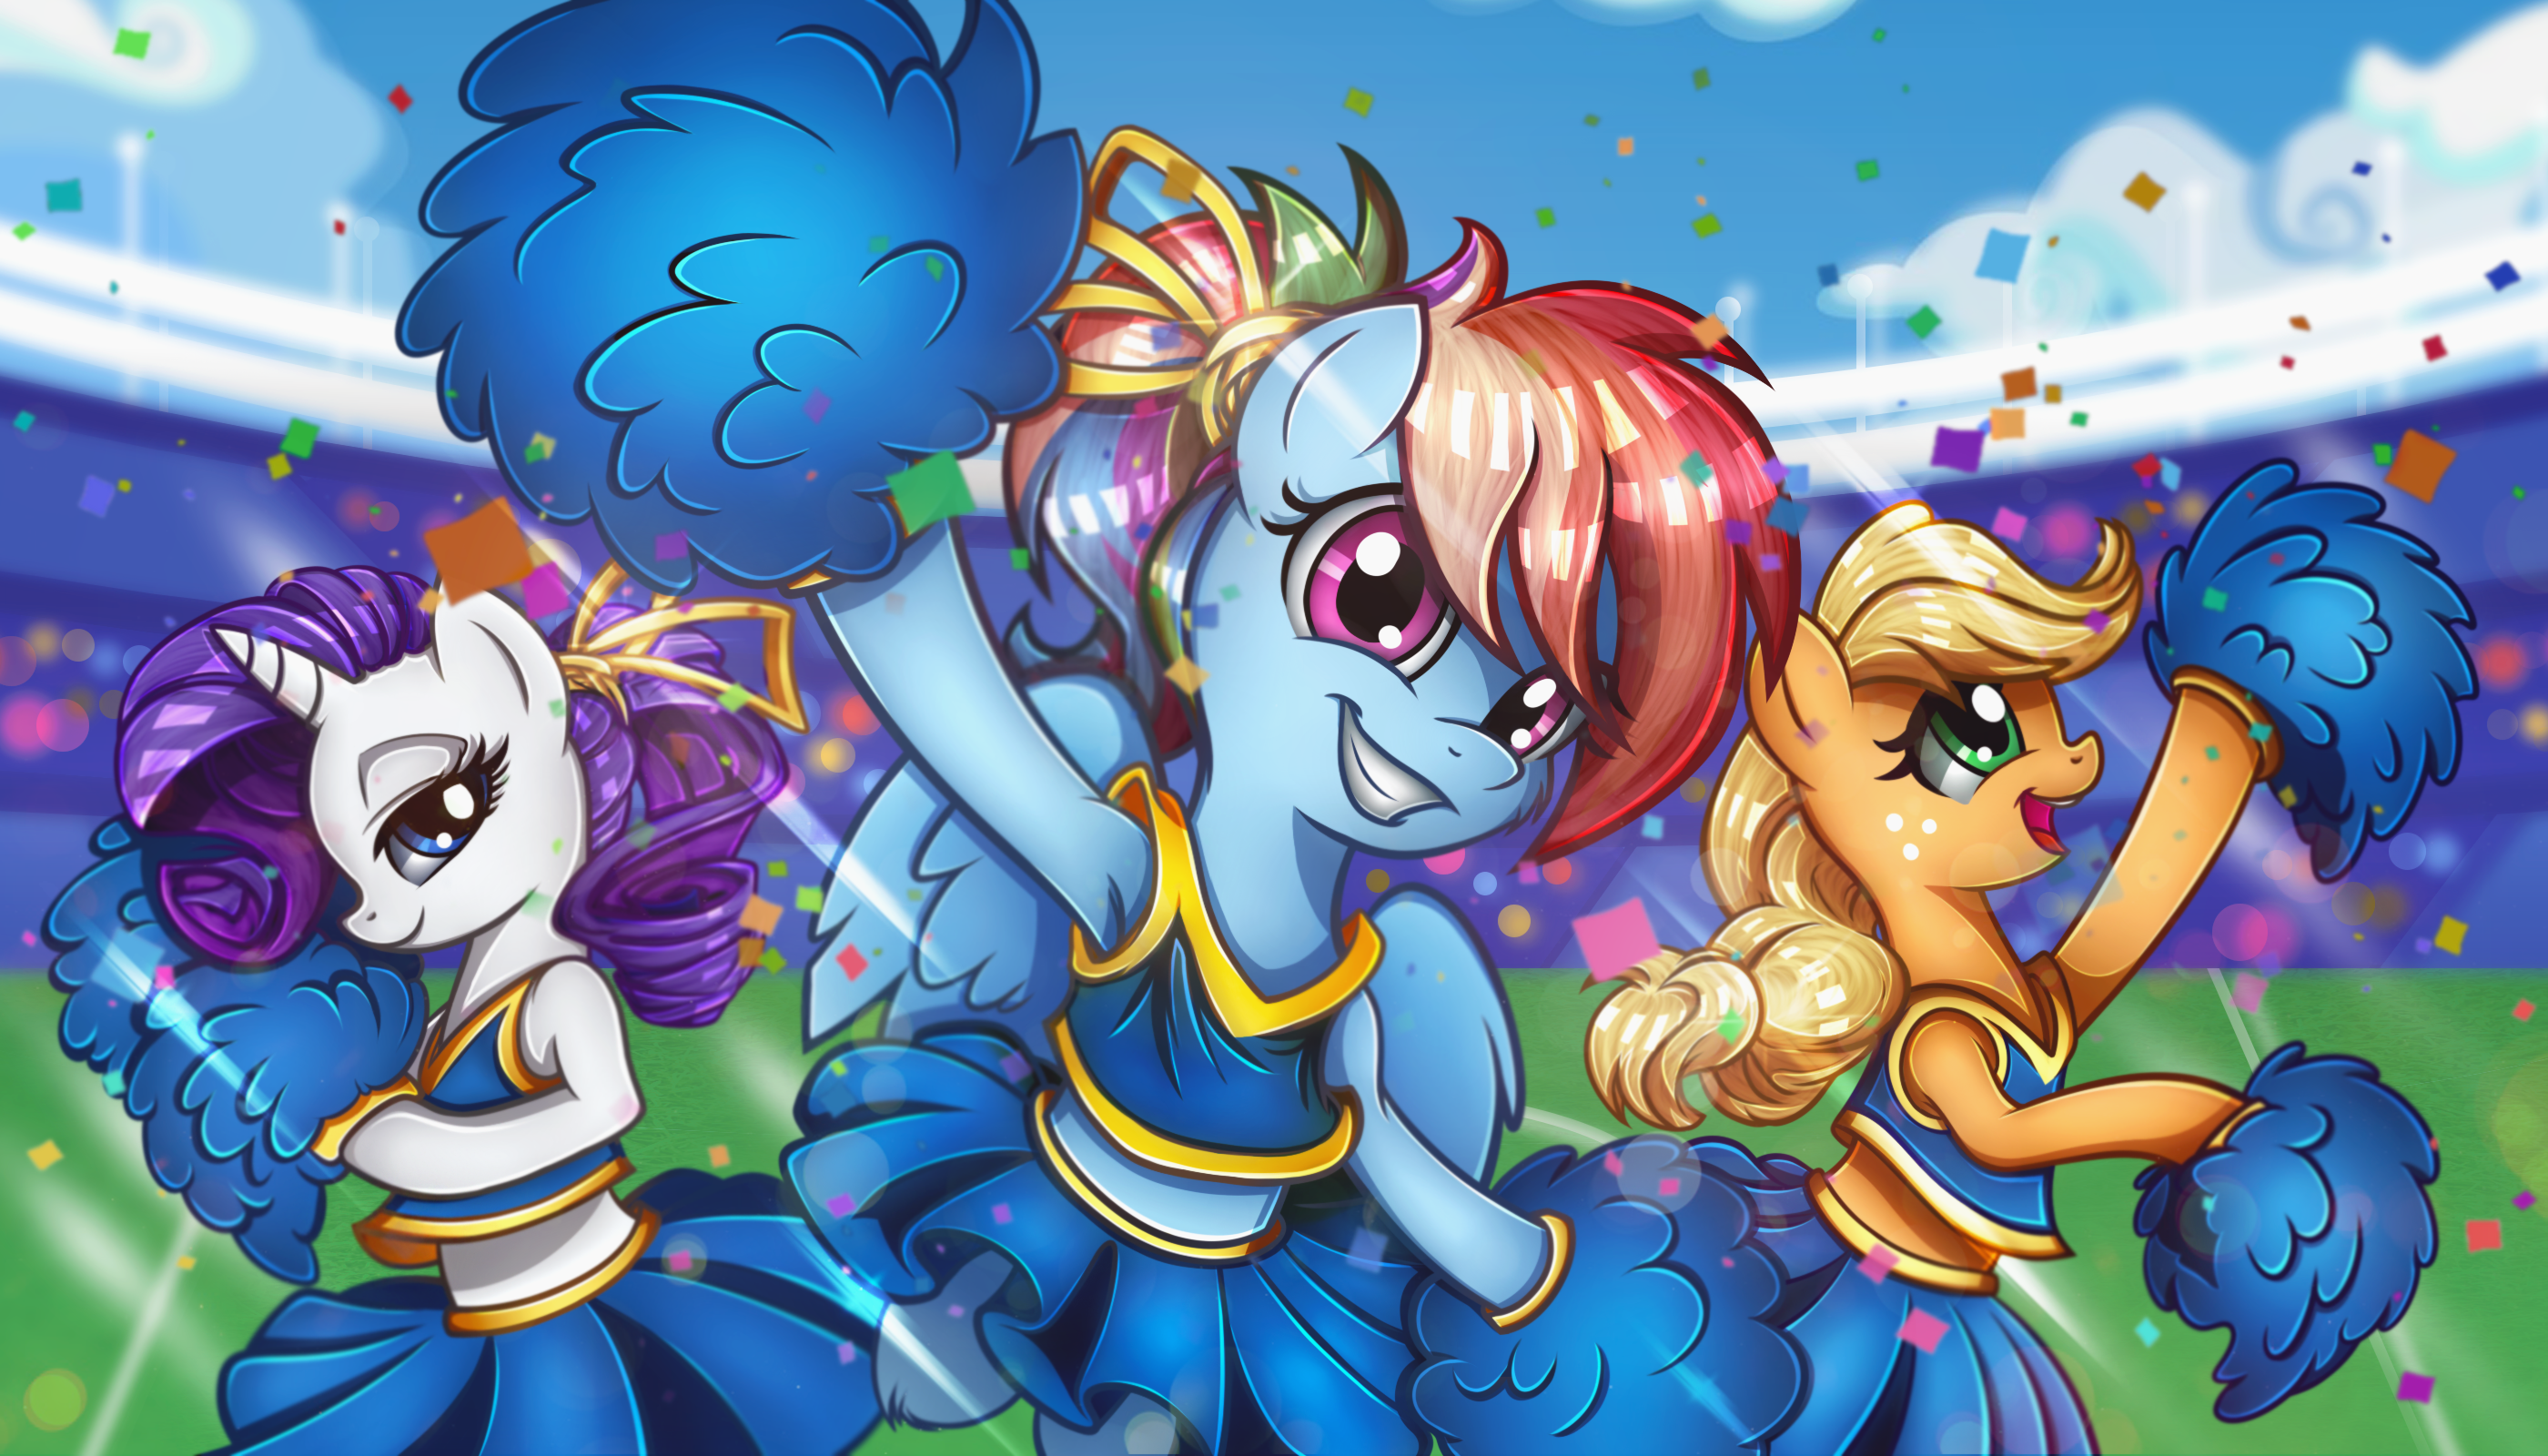 Cheering for the Win! by KP-ShadowSquirrel and Vocalmaker